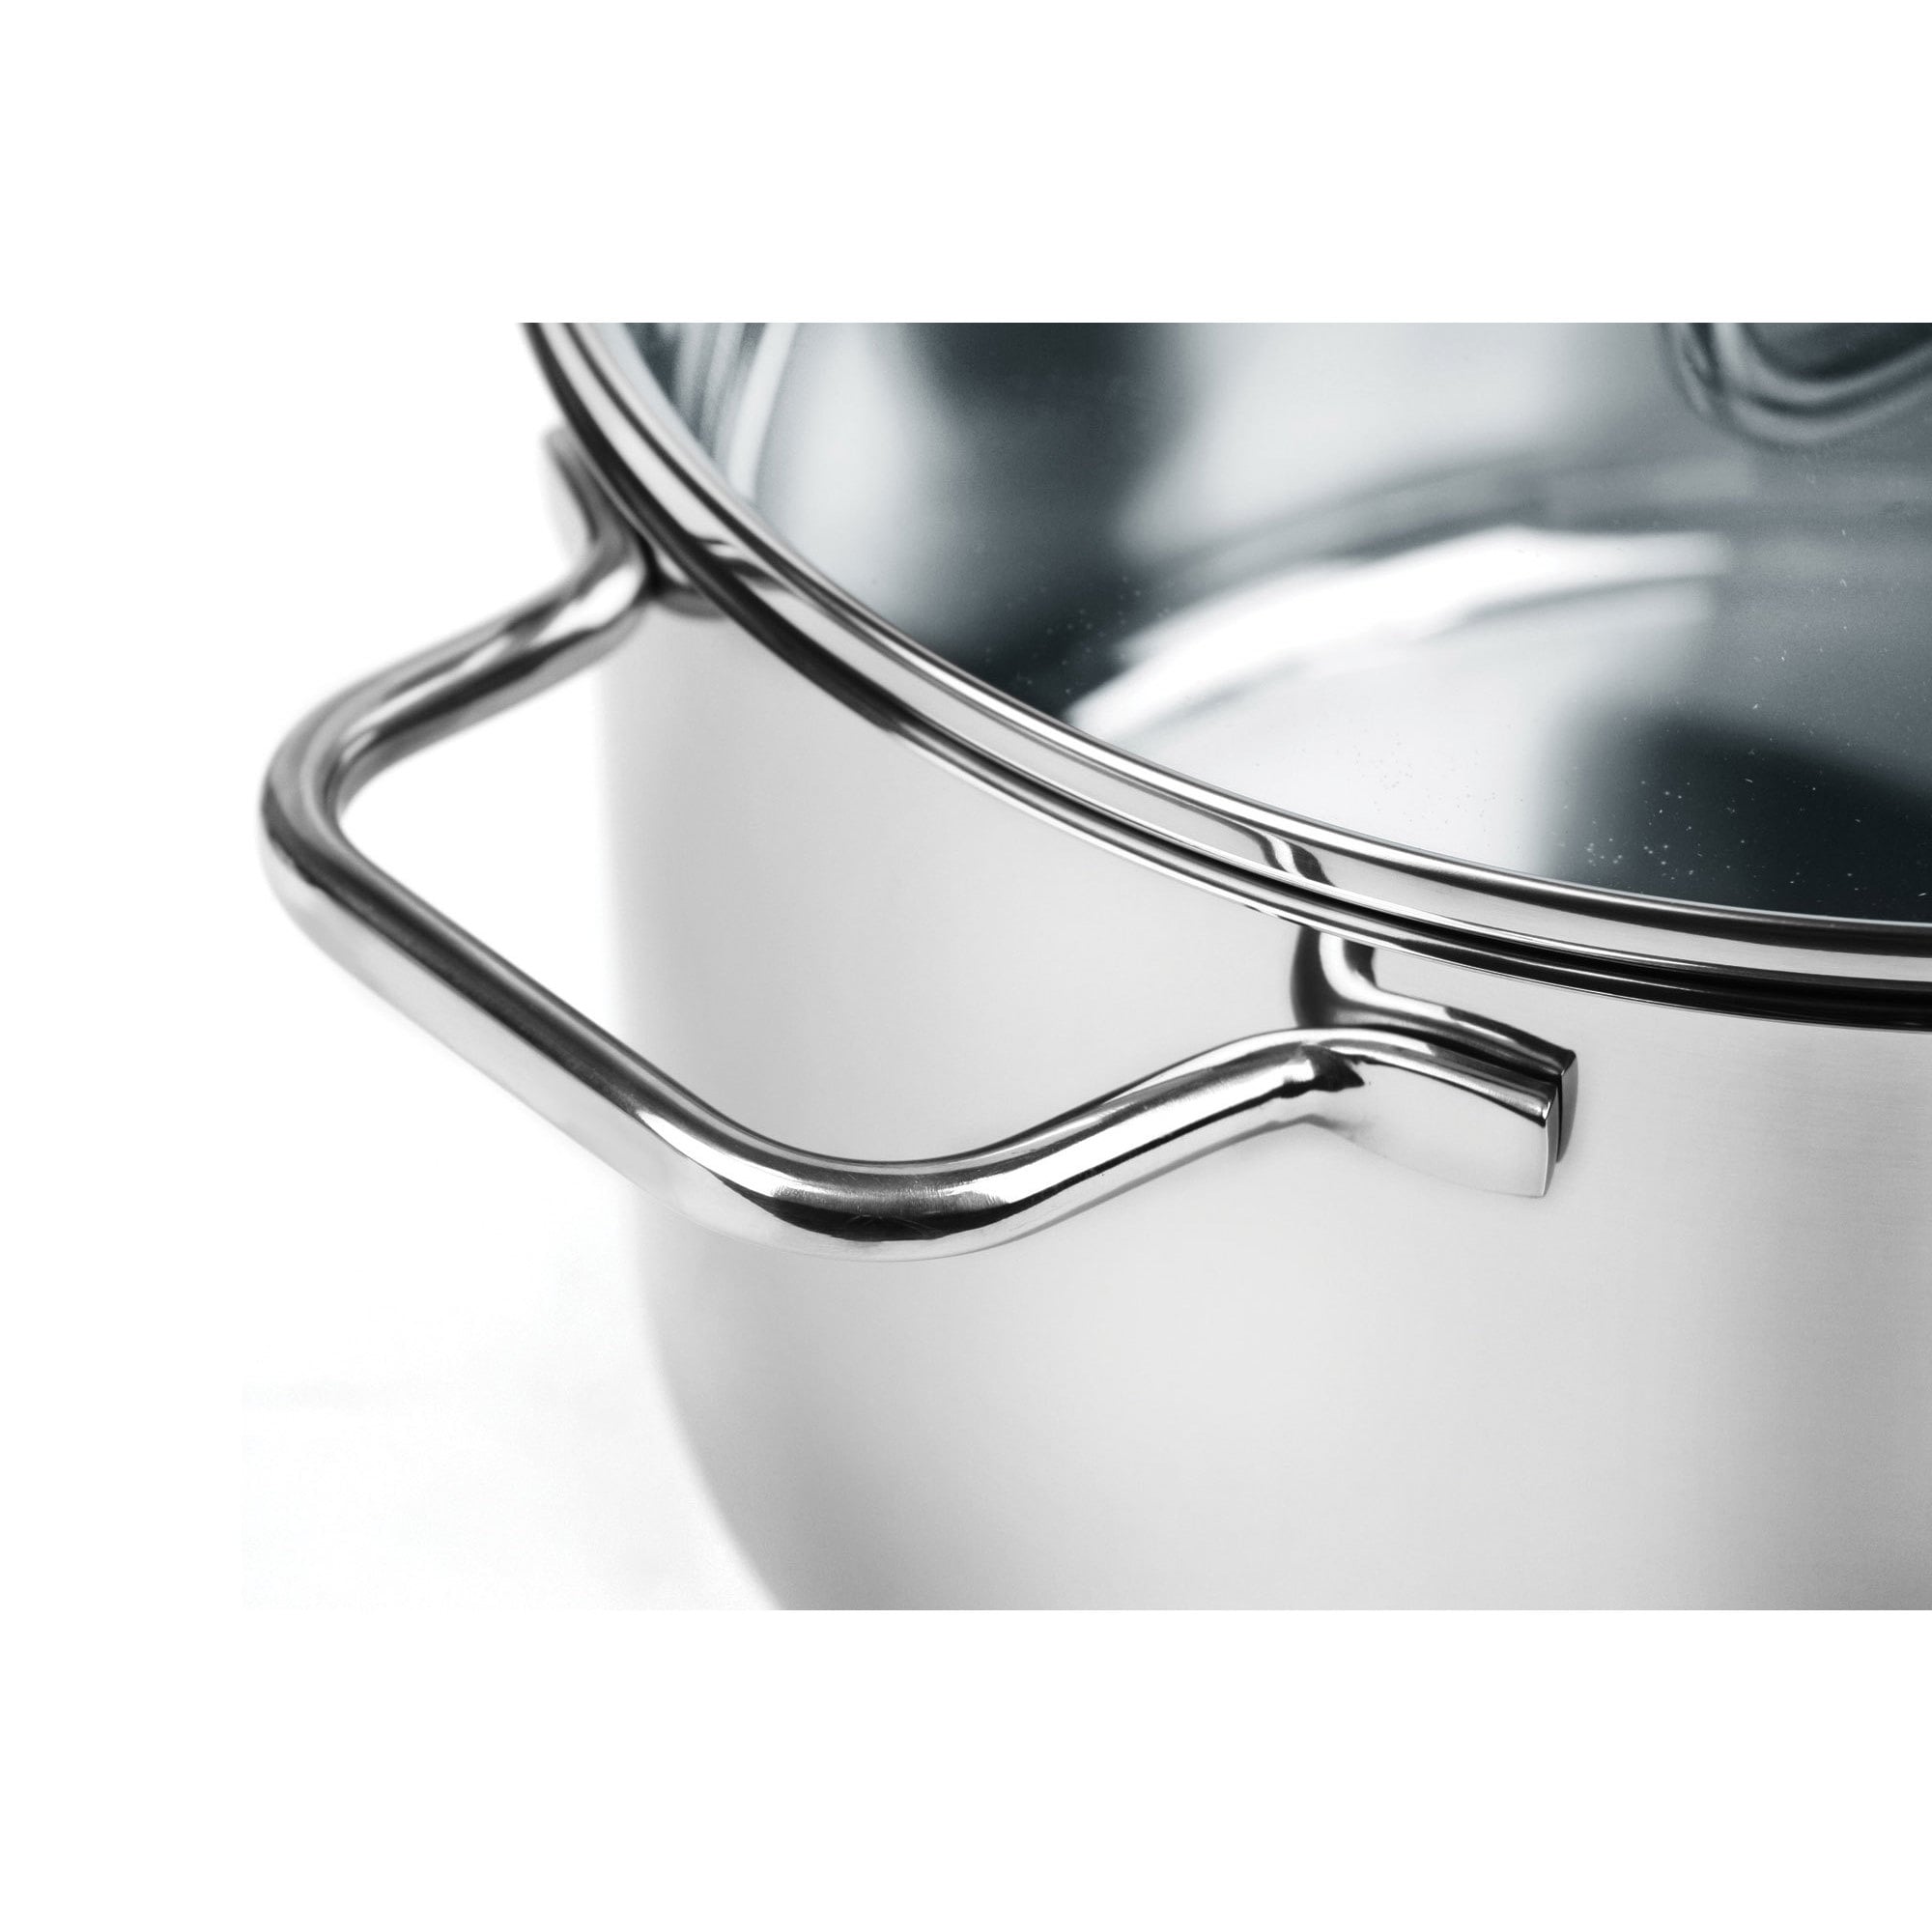 WMF Cookware Sets (22 products) compare price now »